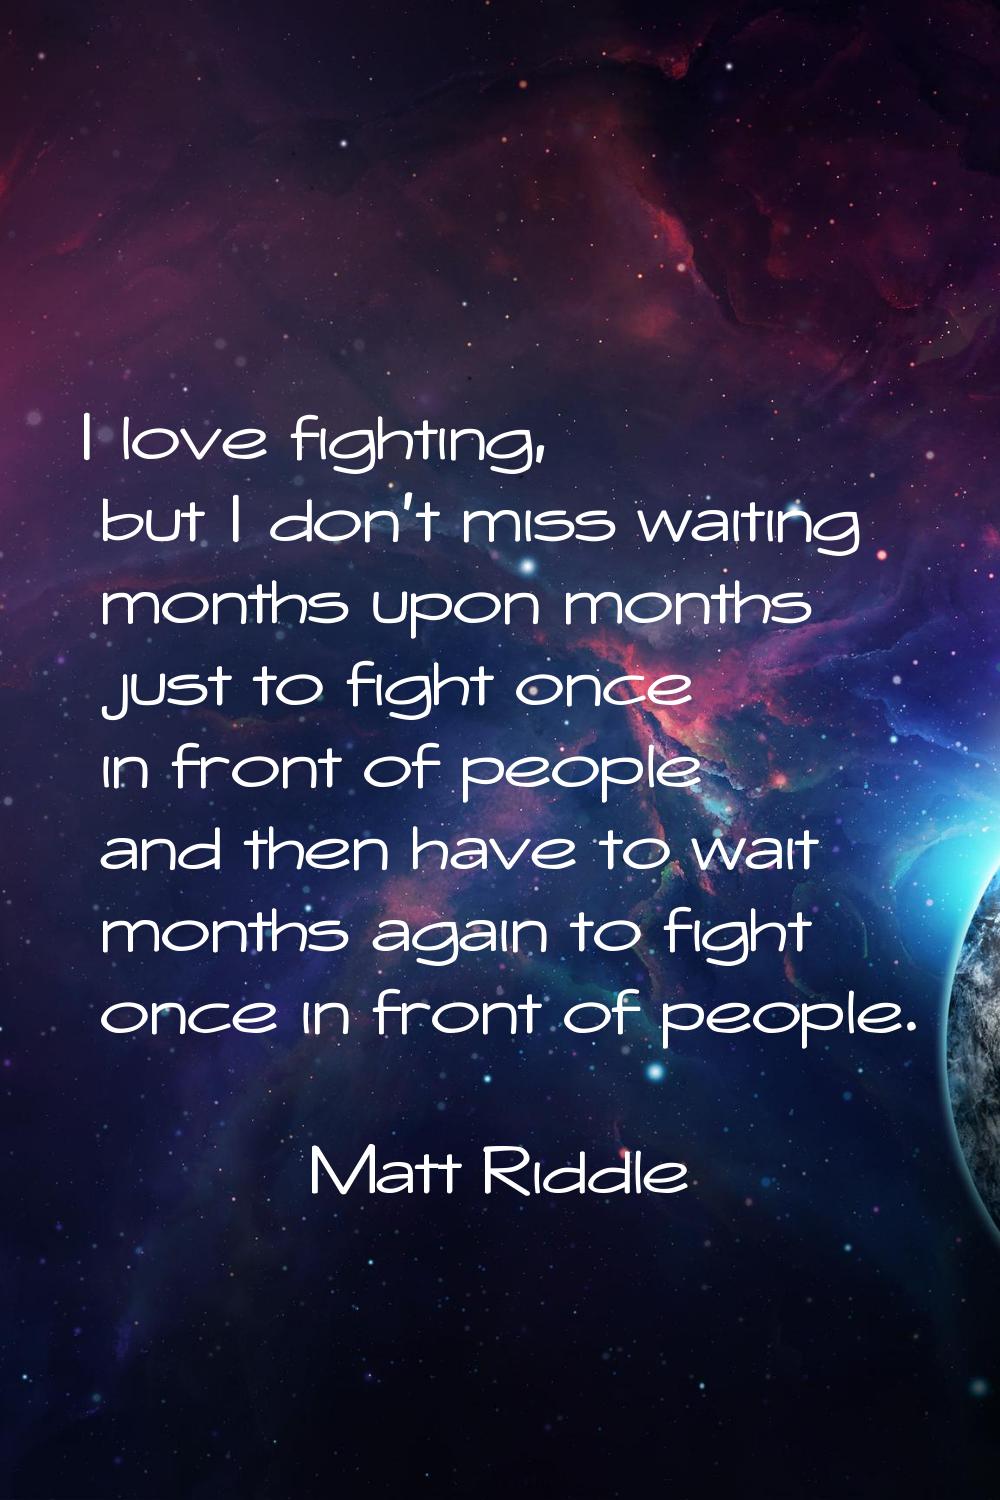 I love fighting, but I don't miss waiting months upon months just to fight once in front of people 